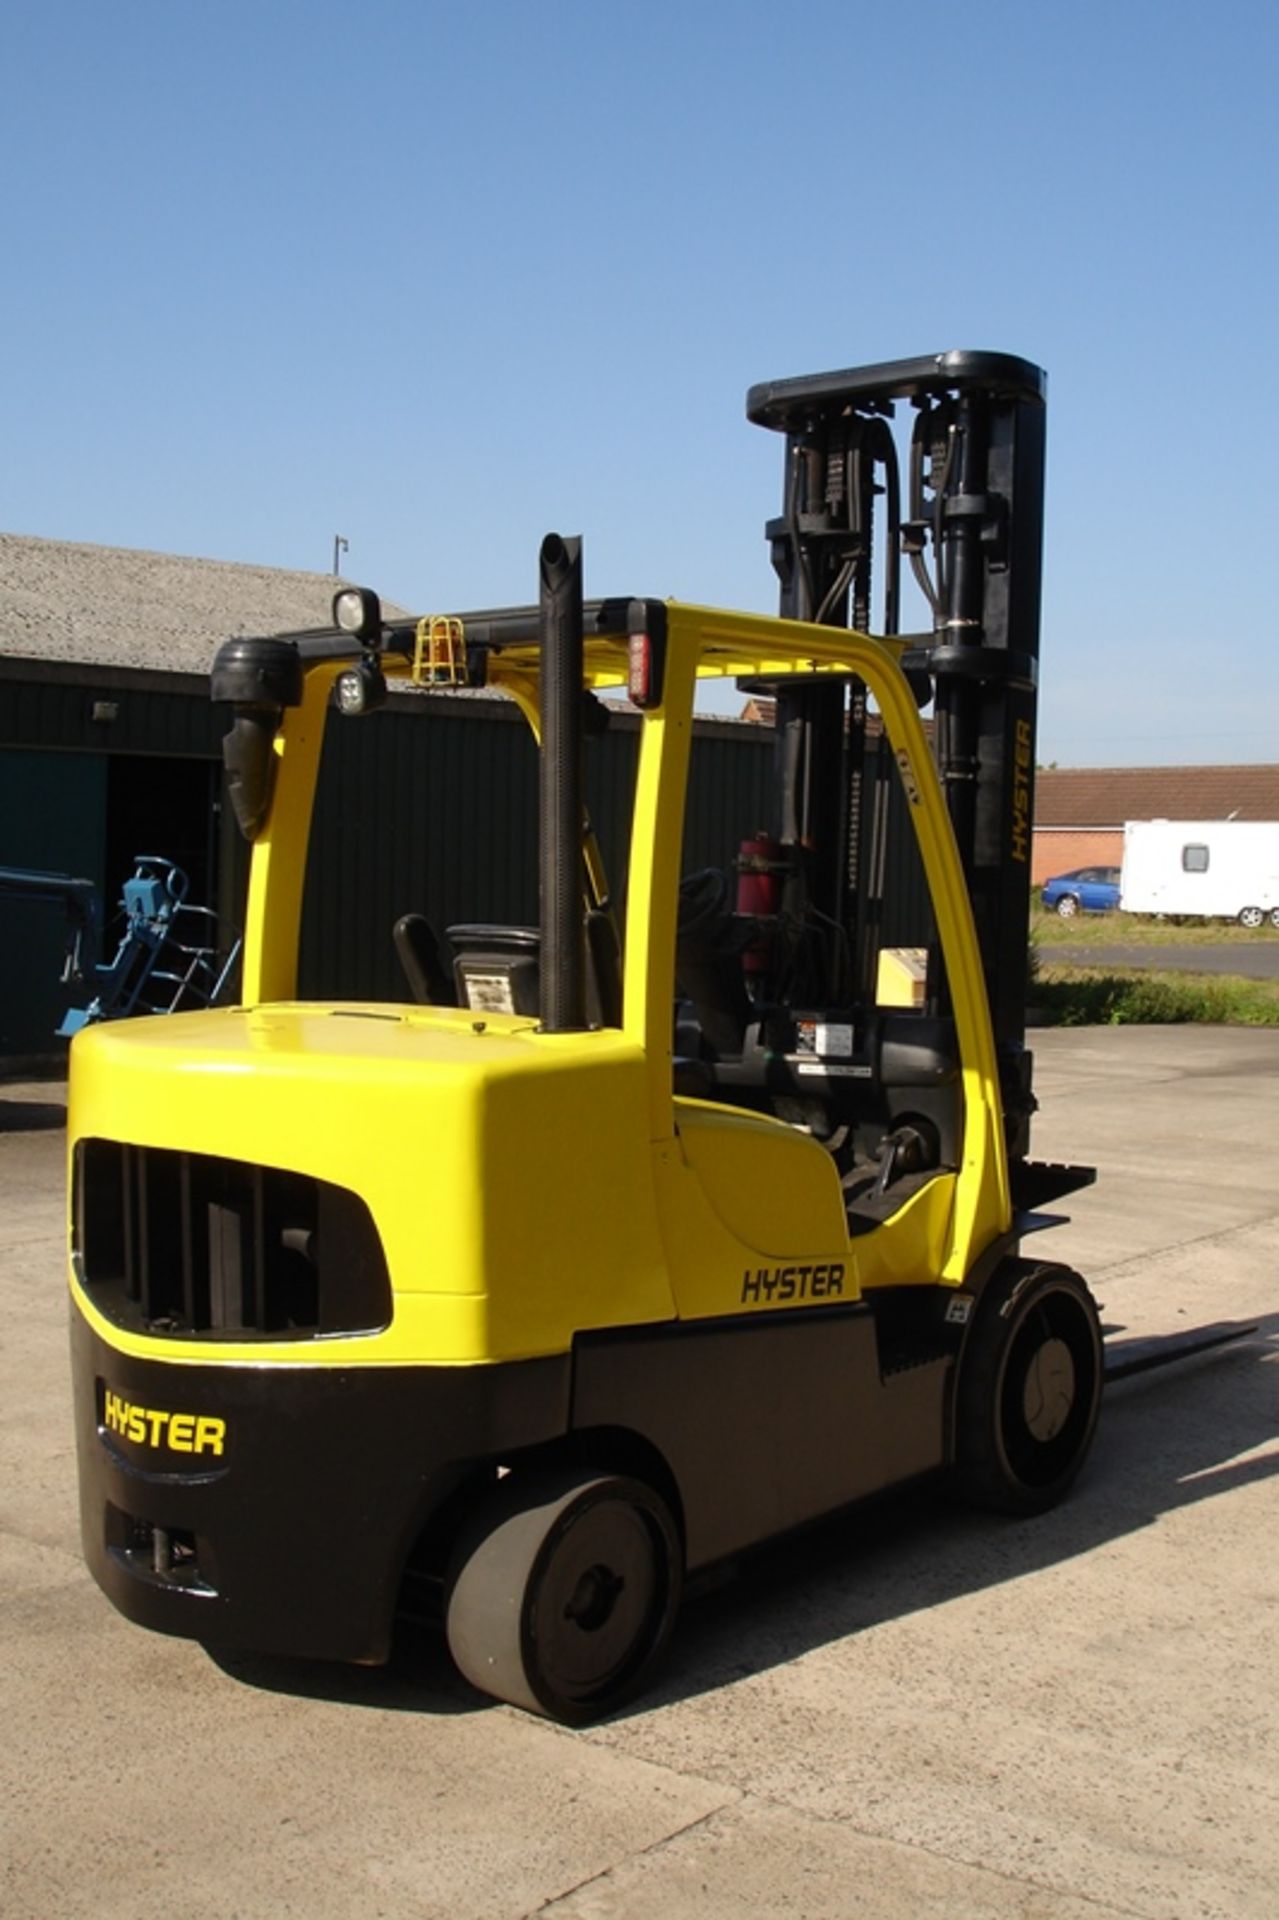 HYSTER COMPACT 7 TON FORKLIFT (2009) - Image 3 of 6